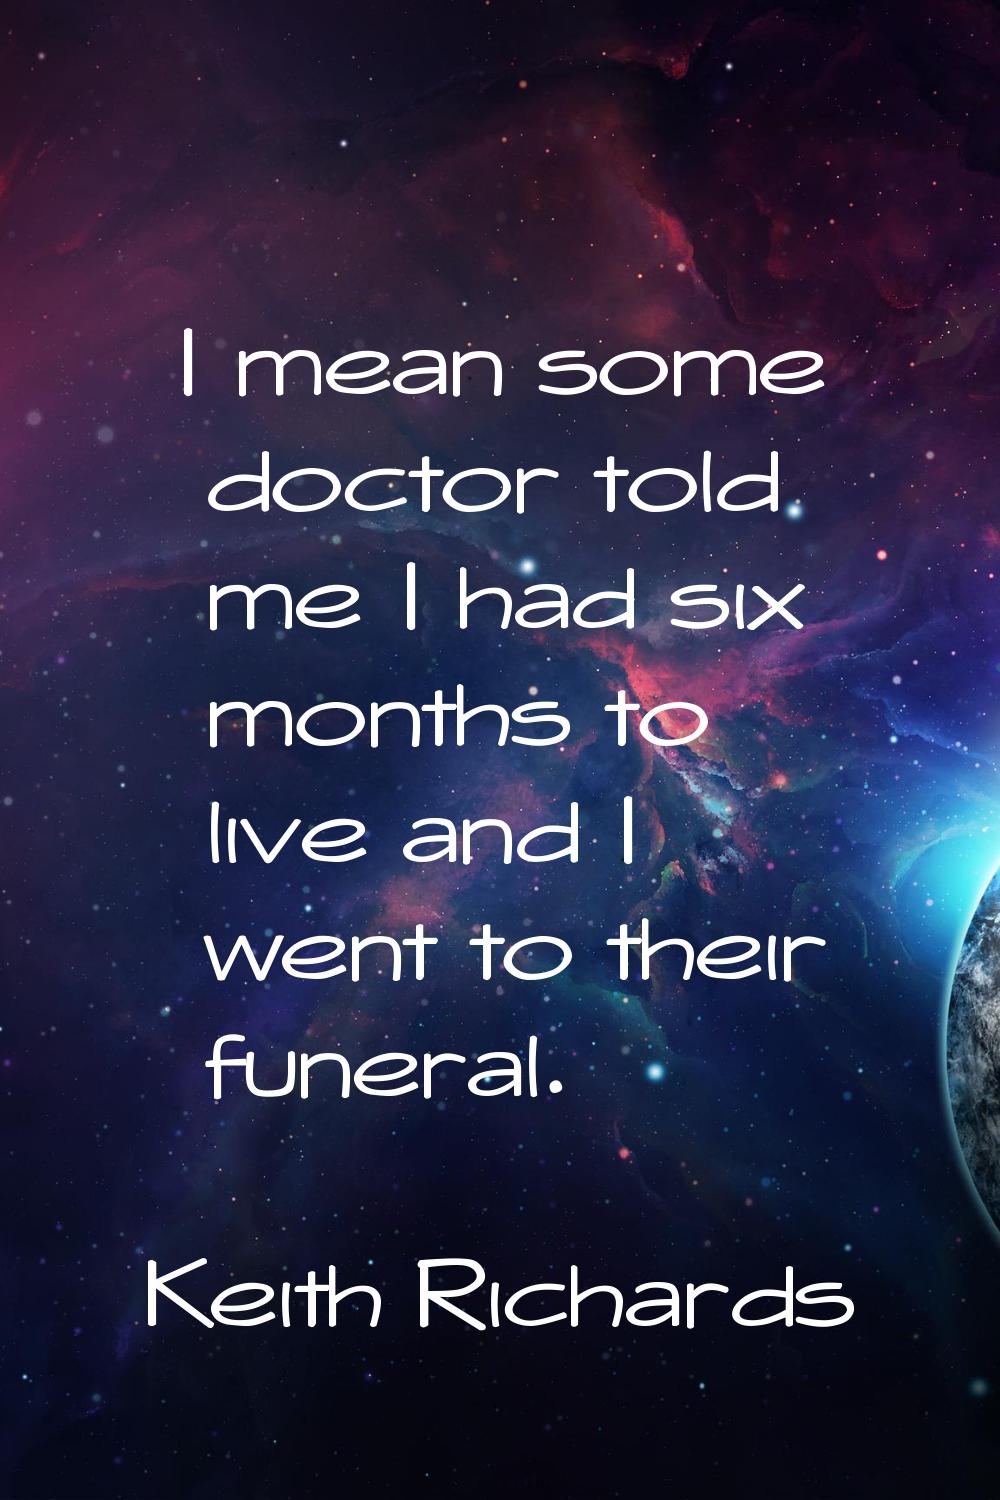 I mean some doctor told me I had six months to live and I went to their funeral.